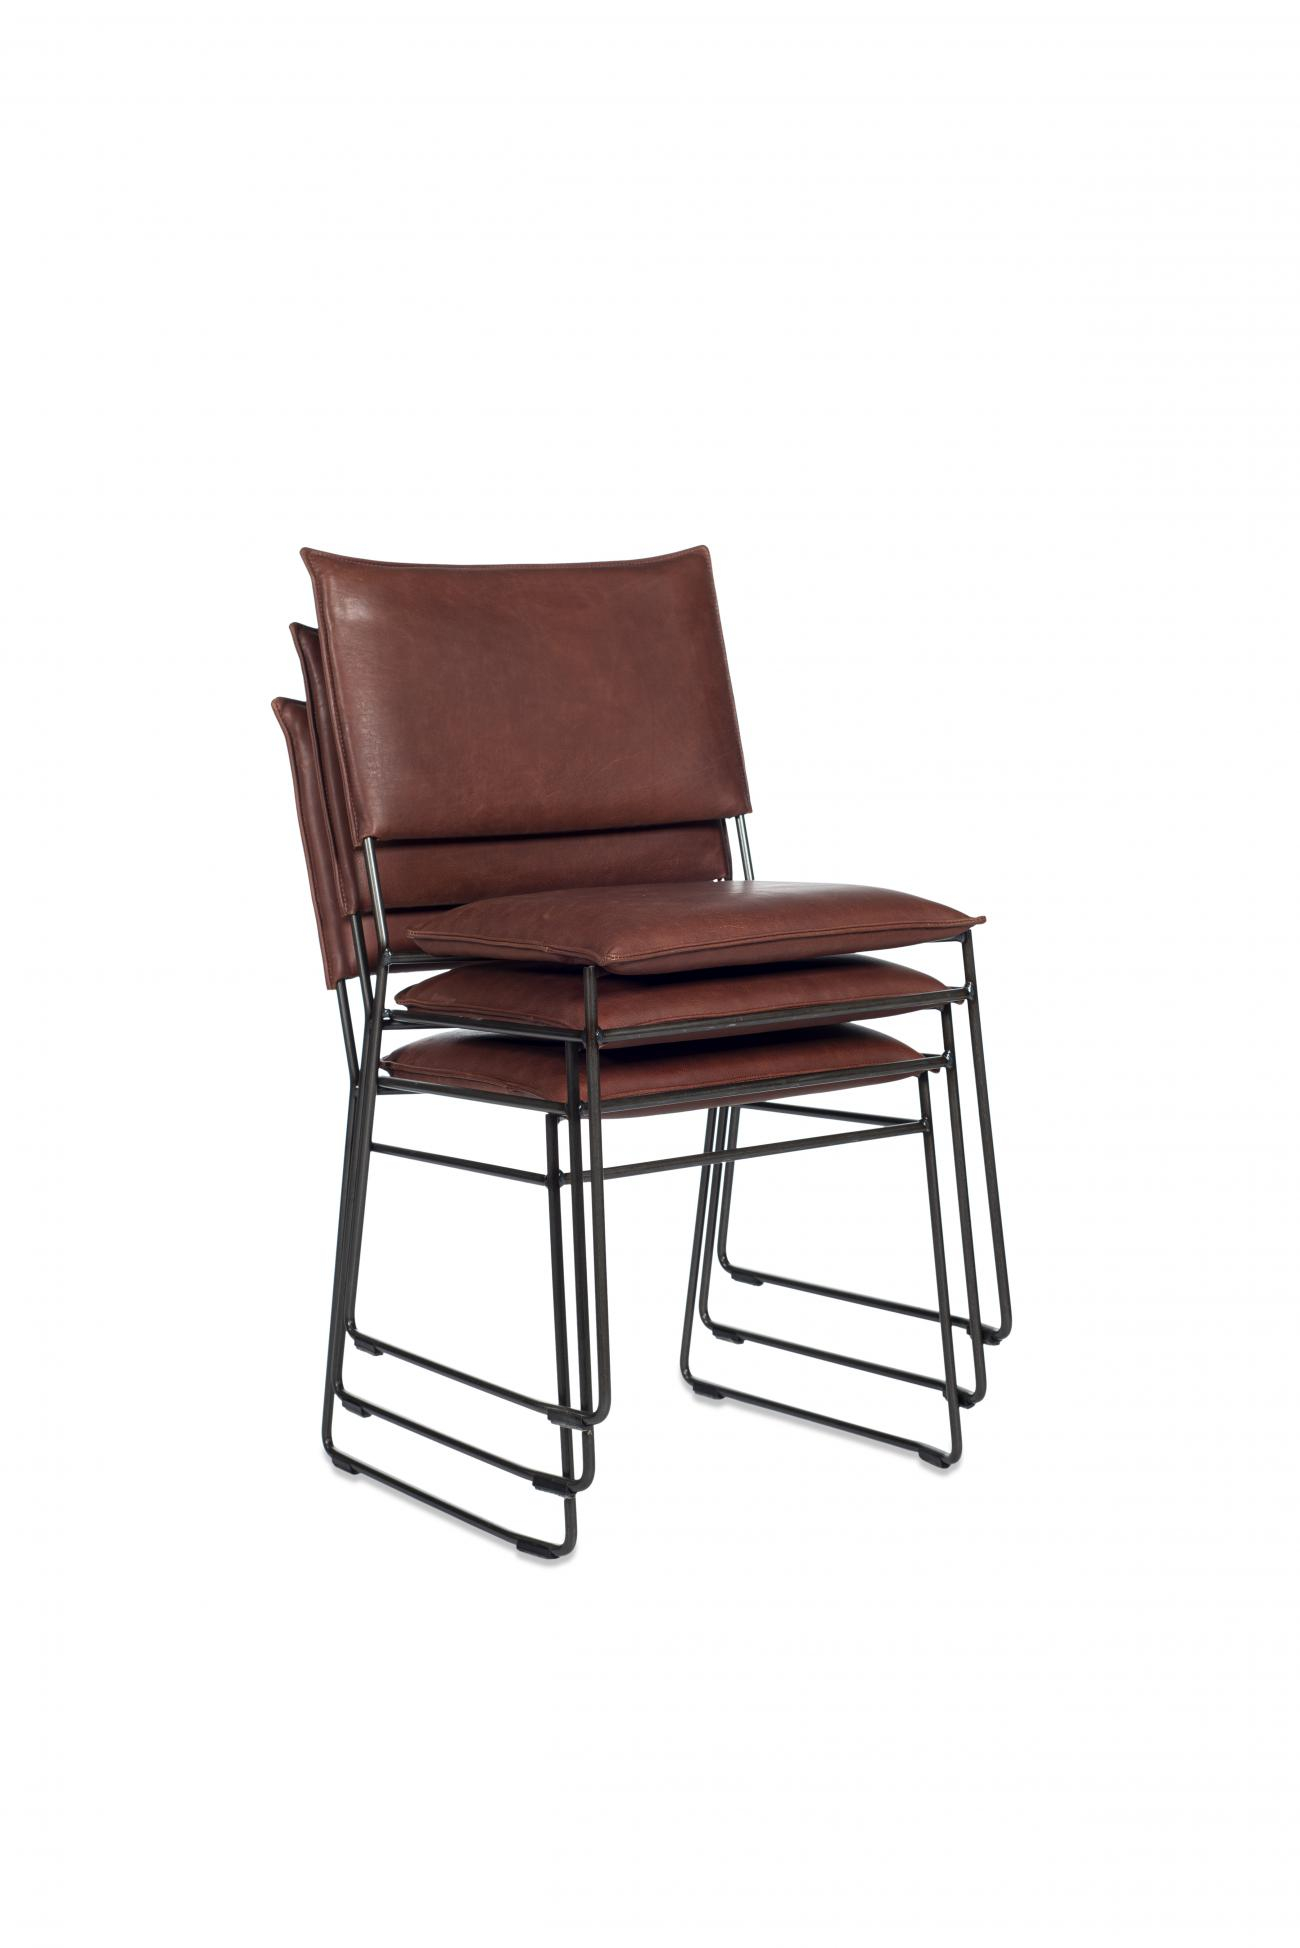 https://www.fundesign.nl/media/catalog/product/n/o/norman_dining_chair_old_glory_stackable_bonanza_british_tan_pers.jpg